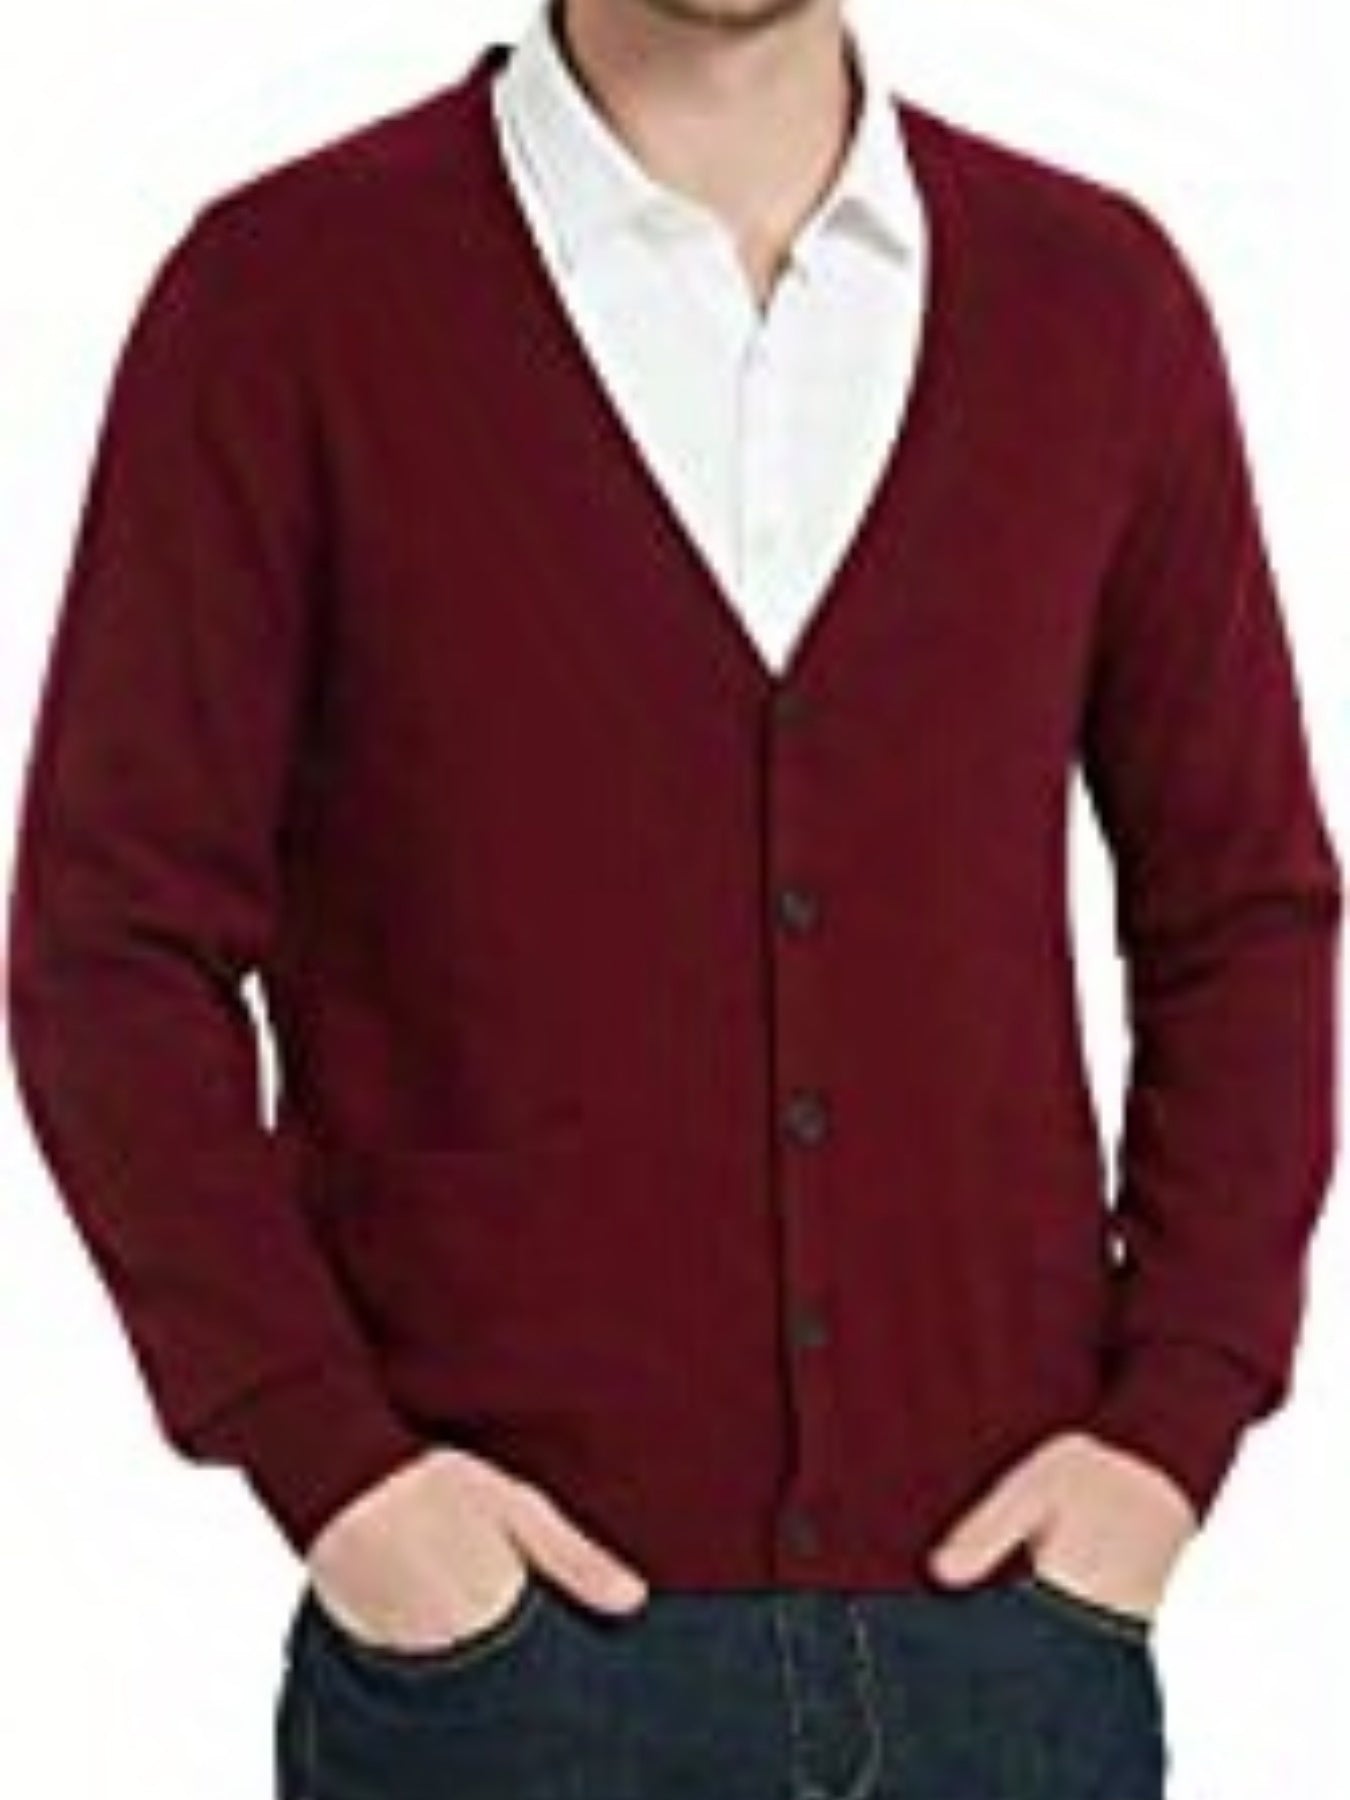 Men's Work V-neck Long Sleeves Button Cardigan Sweaters